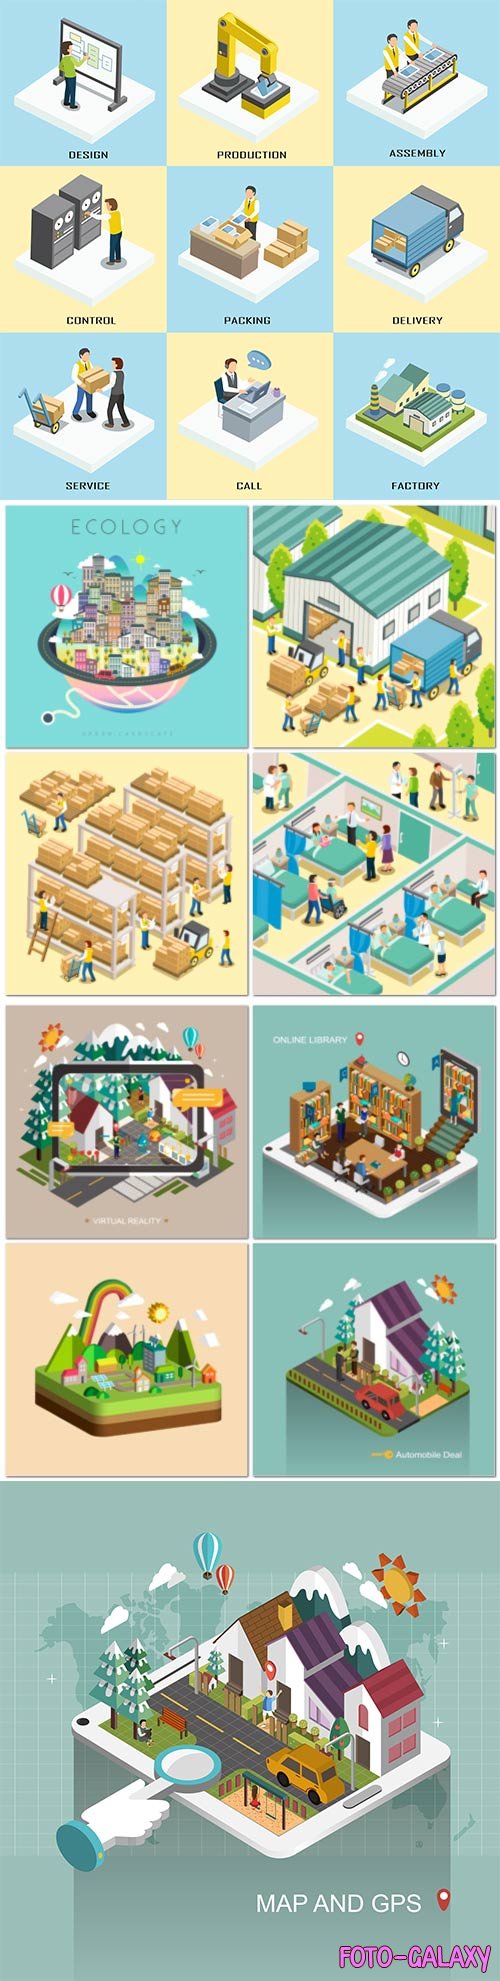 Concept in 3d isometric flat design vector template vol 2